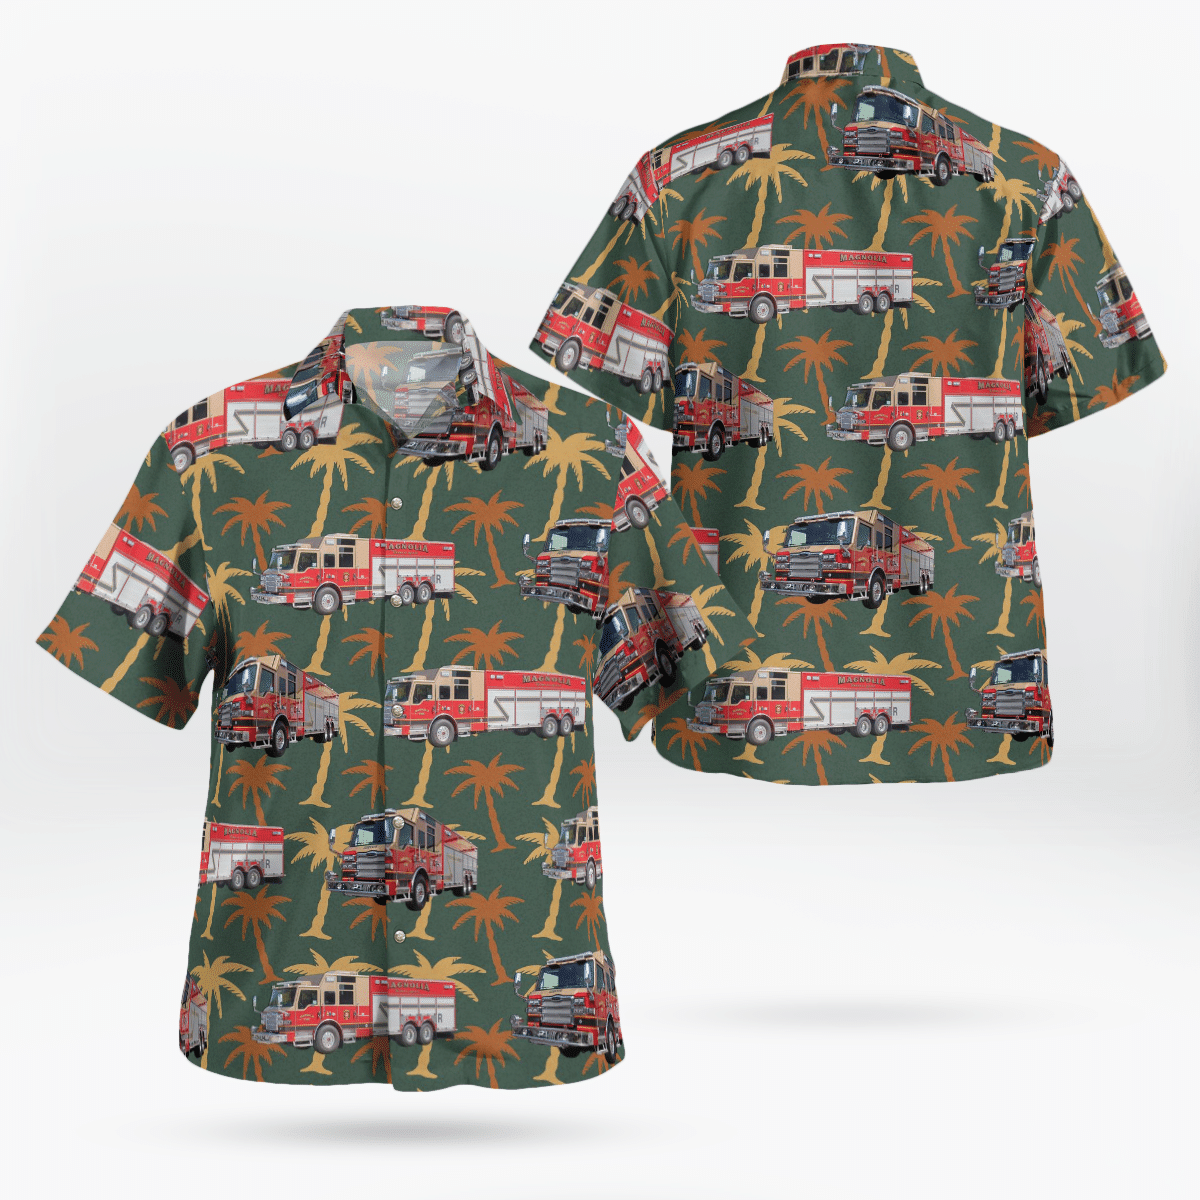 Shop now to find the perfect Hawaii Shirt for your hobby 167